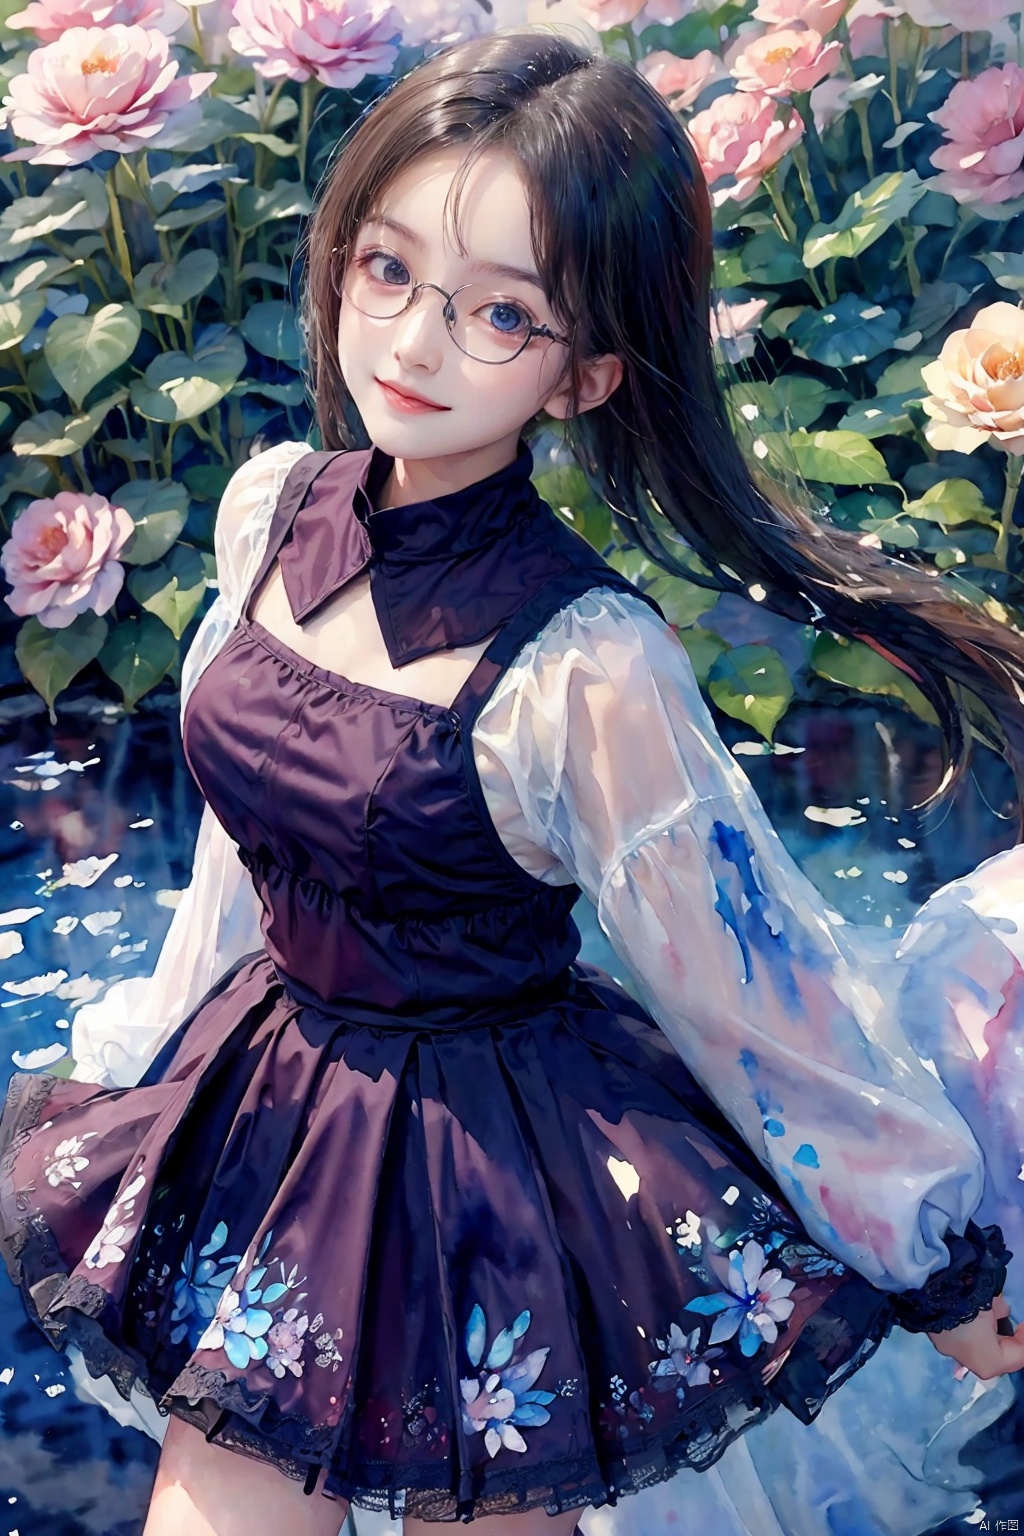  (watercolor medium:1.3), (watercolor painting:1.5), //quality Masterpiece, ultra detailed, hyper high quality, quality beyond the limits of AI, the ultimate in wisdom, top of the line quality, 8K, //Character 1girl, wearing glasses, Beautiful eyes, detailed eyes, big eyes, grin, fine face, //Fashion (Sharara Kameez:1.3), //Background Beautiful blue sky, calm sunshine, flower garden